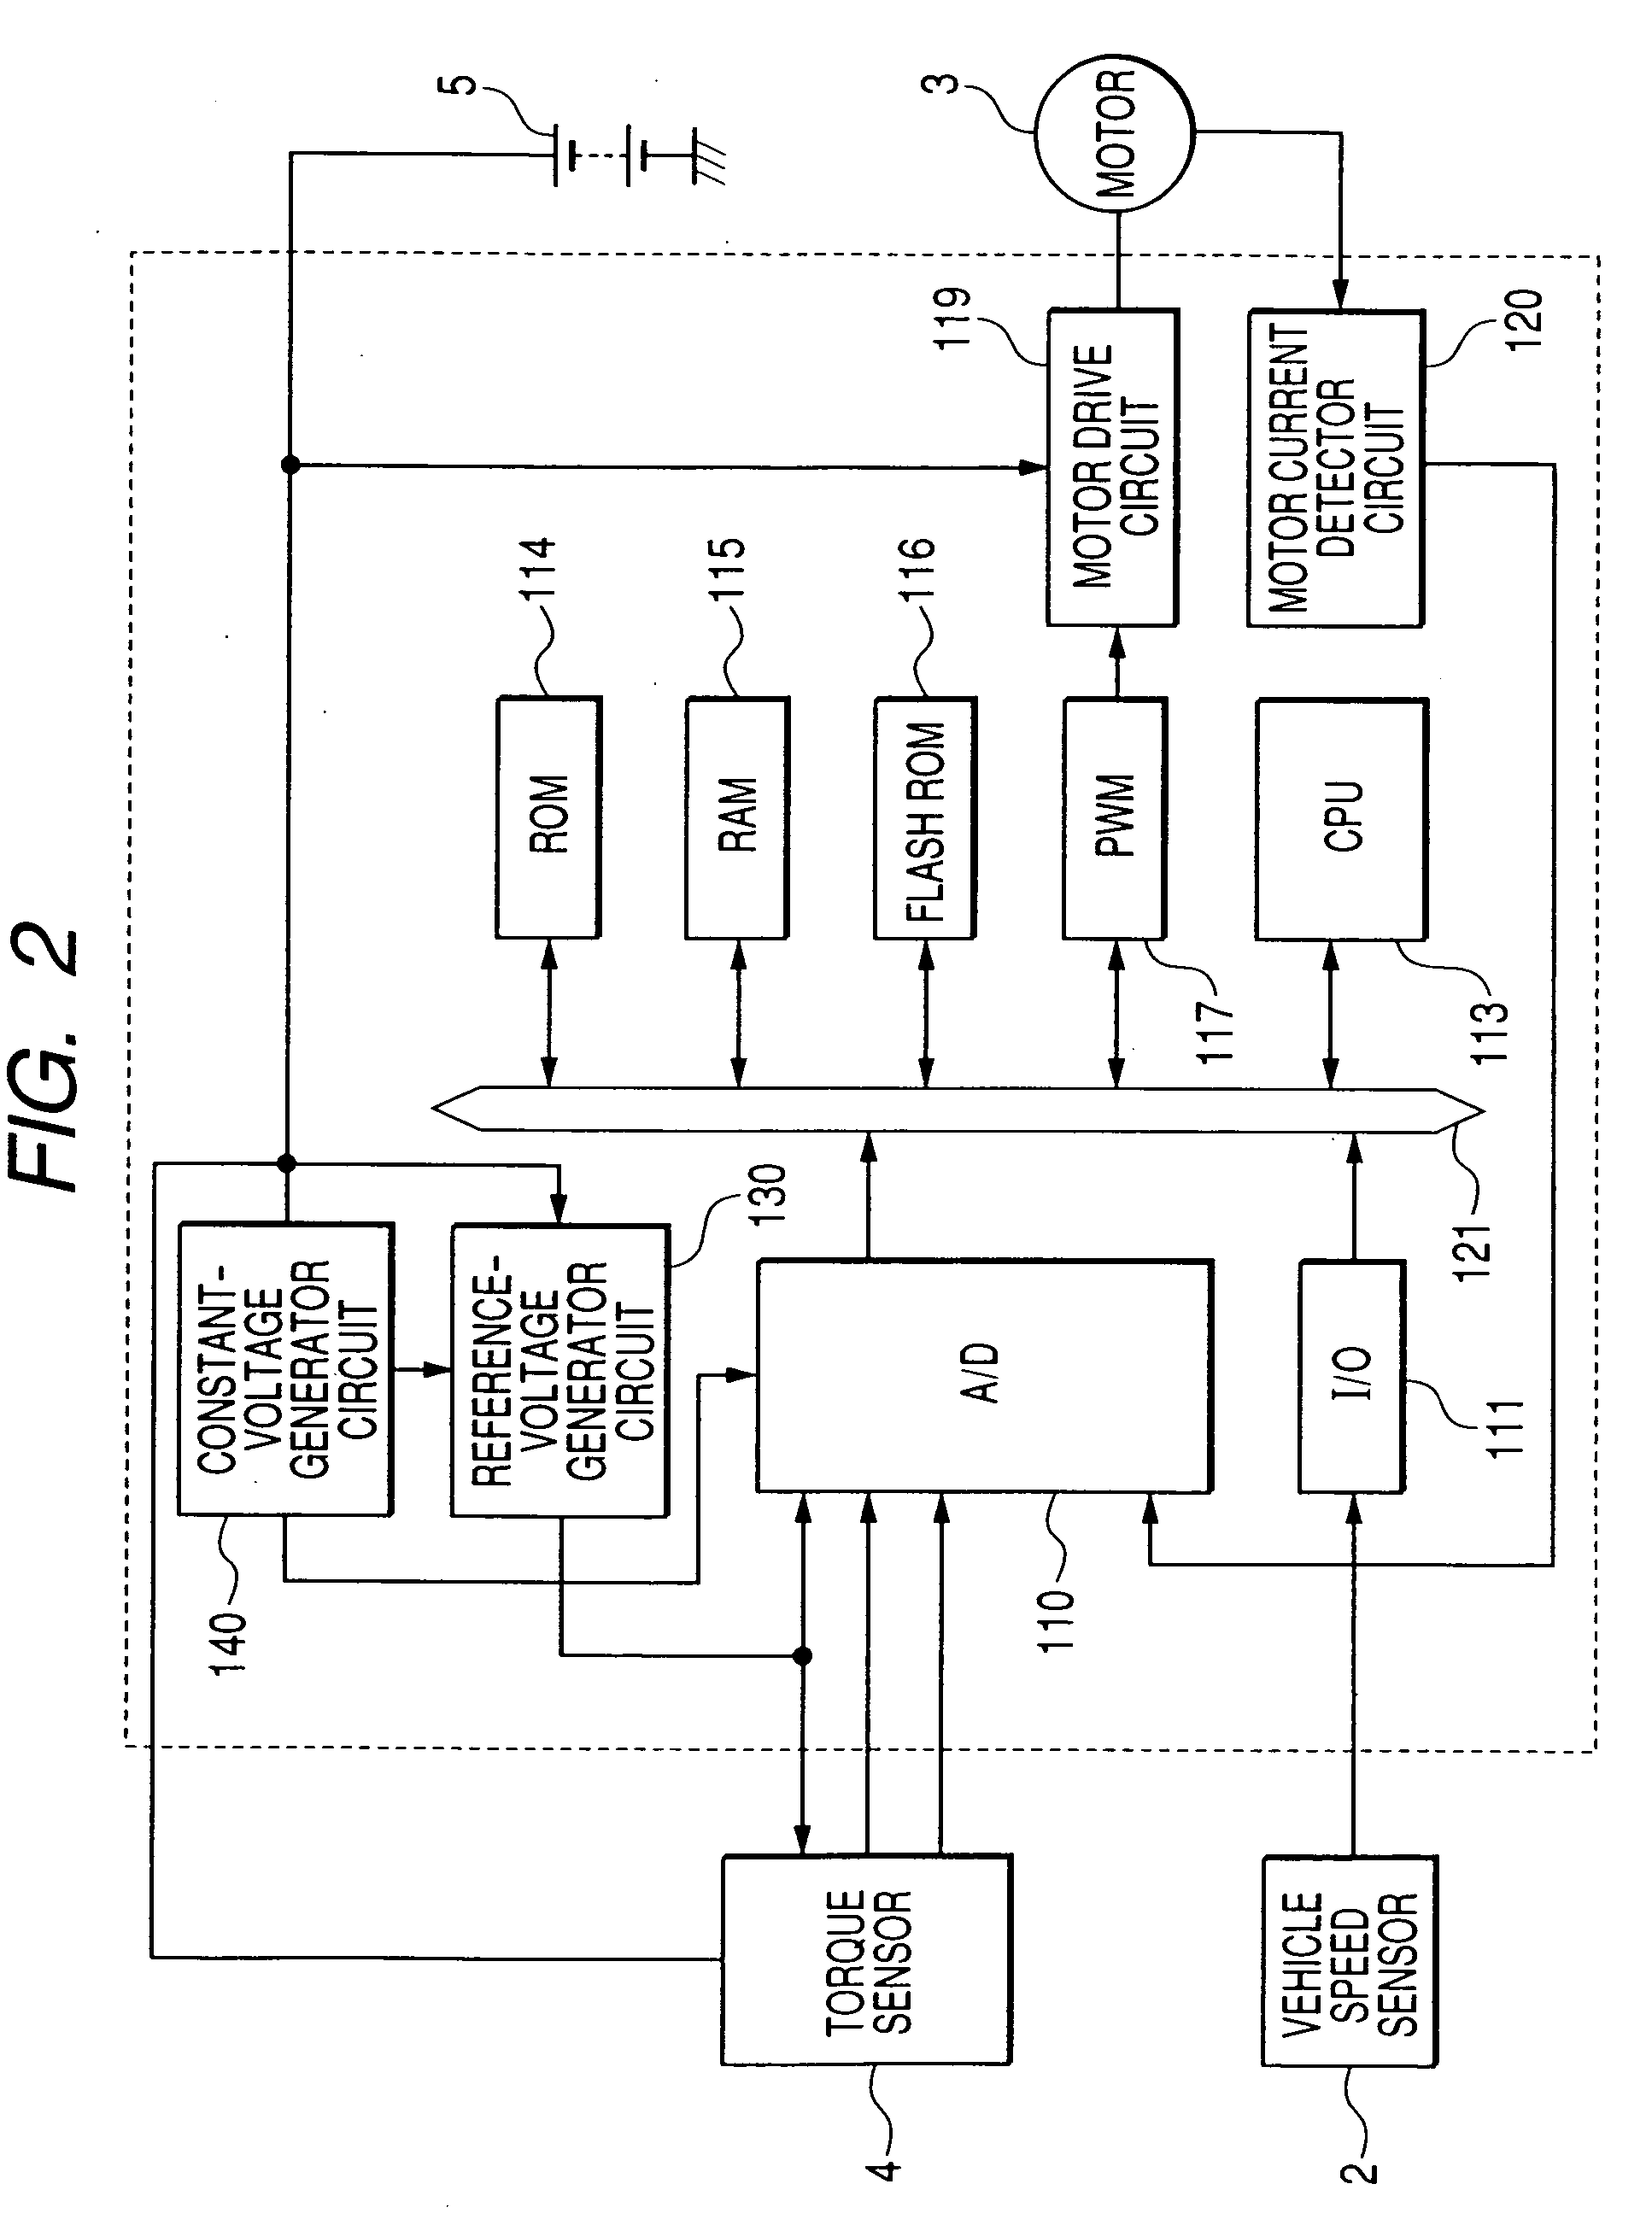 Power steering control device for monitoring reference voltage